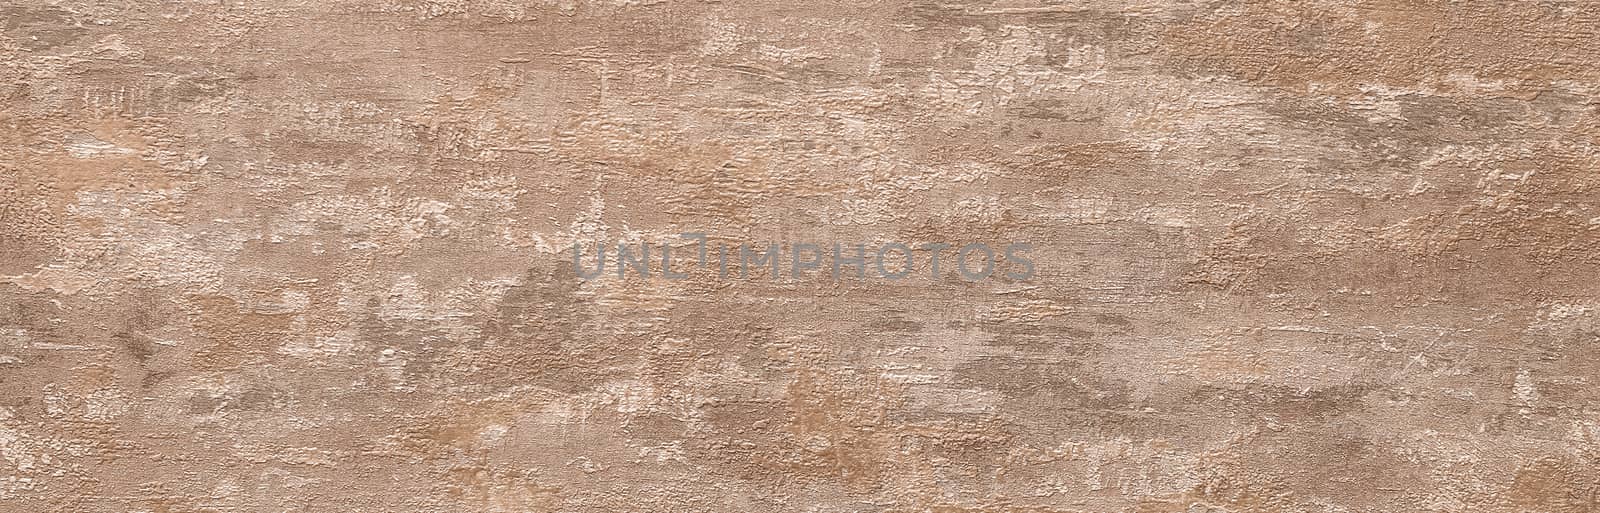 Taupe abstract grungy decorative texture. Textured paper with copy space. Motley brown paper surface, texture closeup.